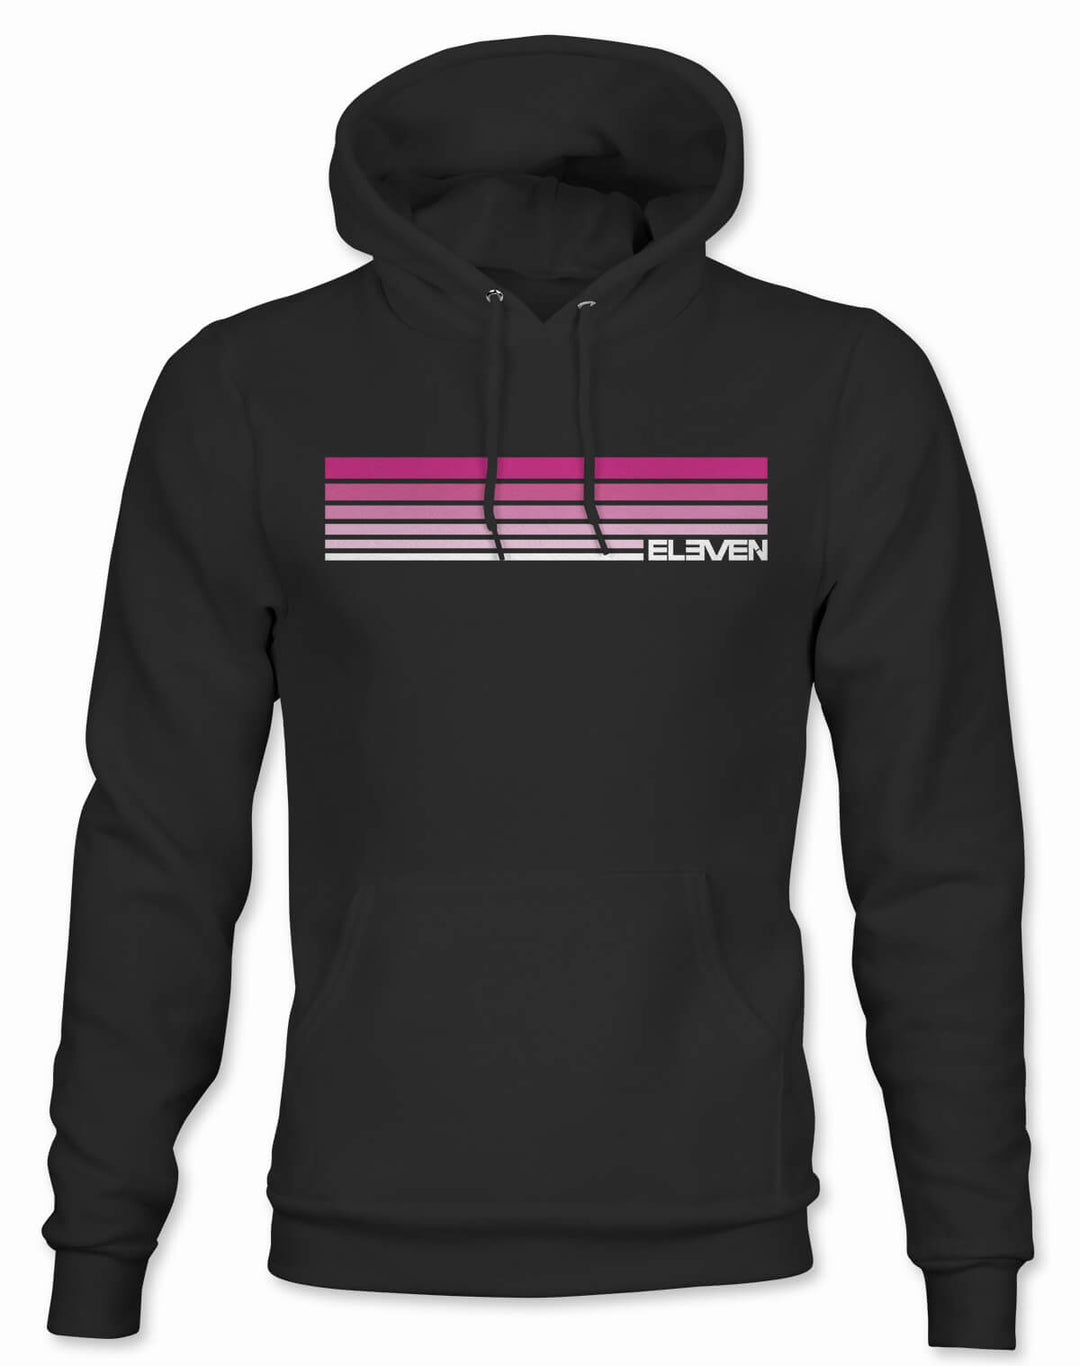 RETRO STRIPES EVENTIDE HOODIE - WHITE TO PINK ON BLACK - ELEVEN